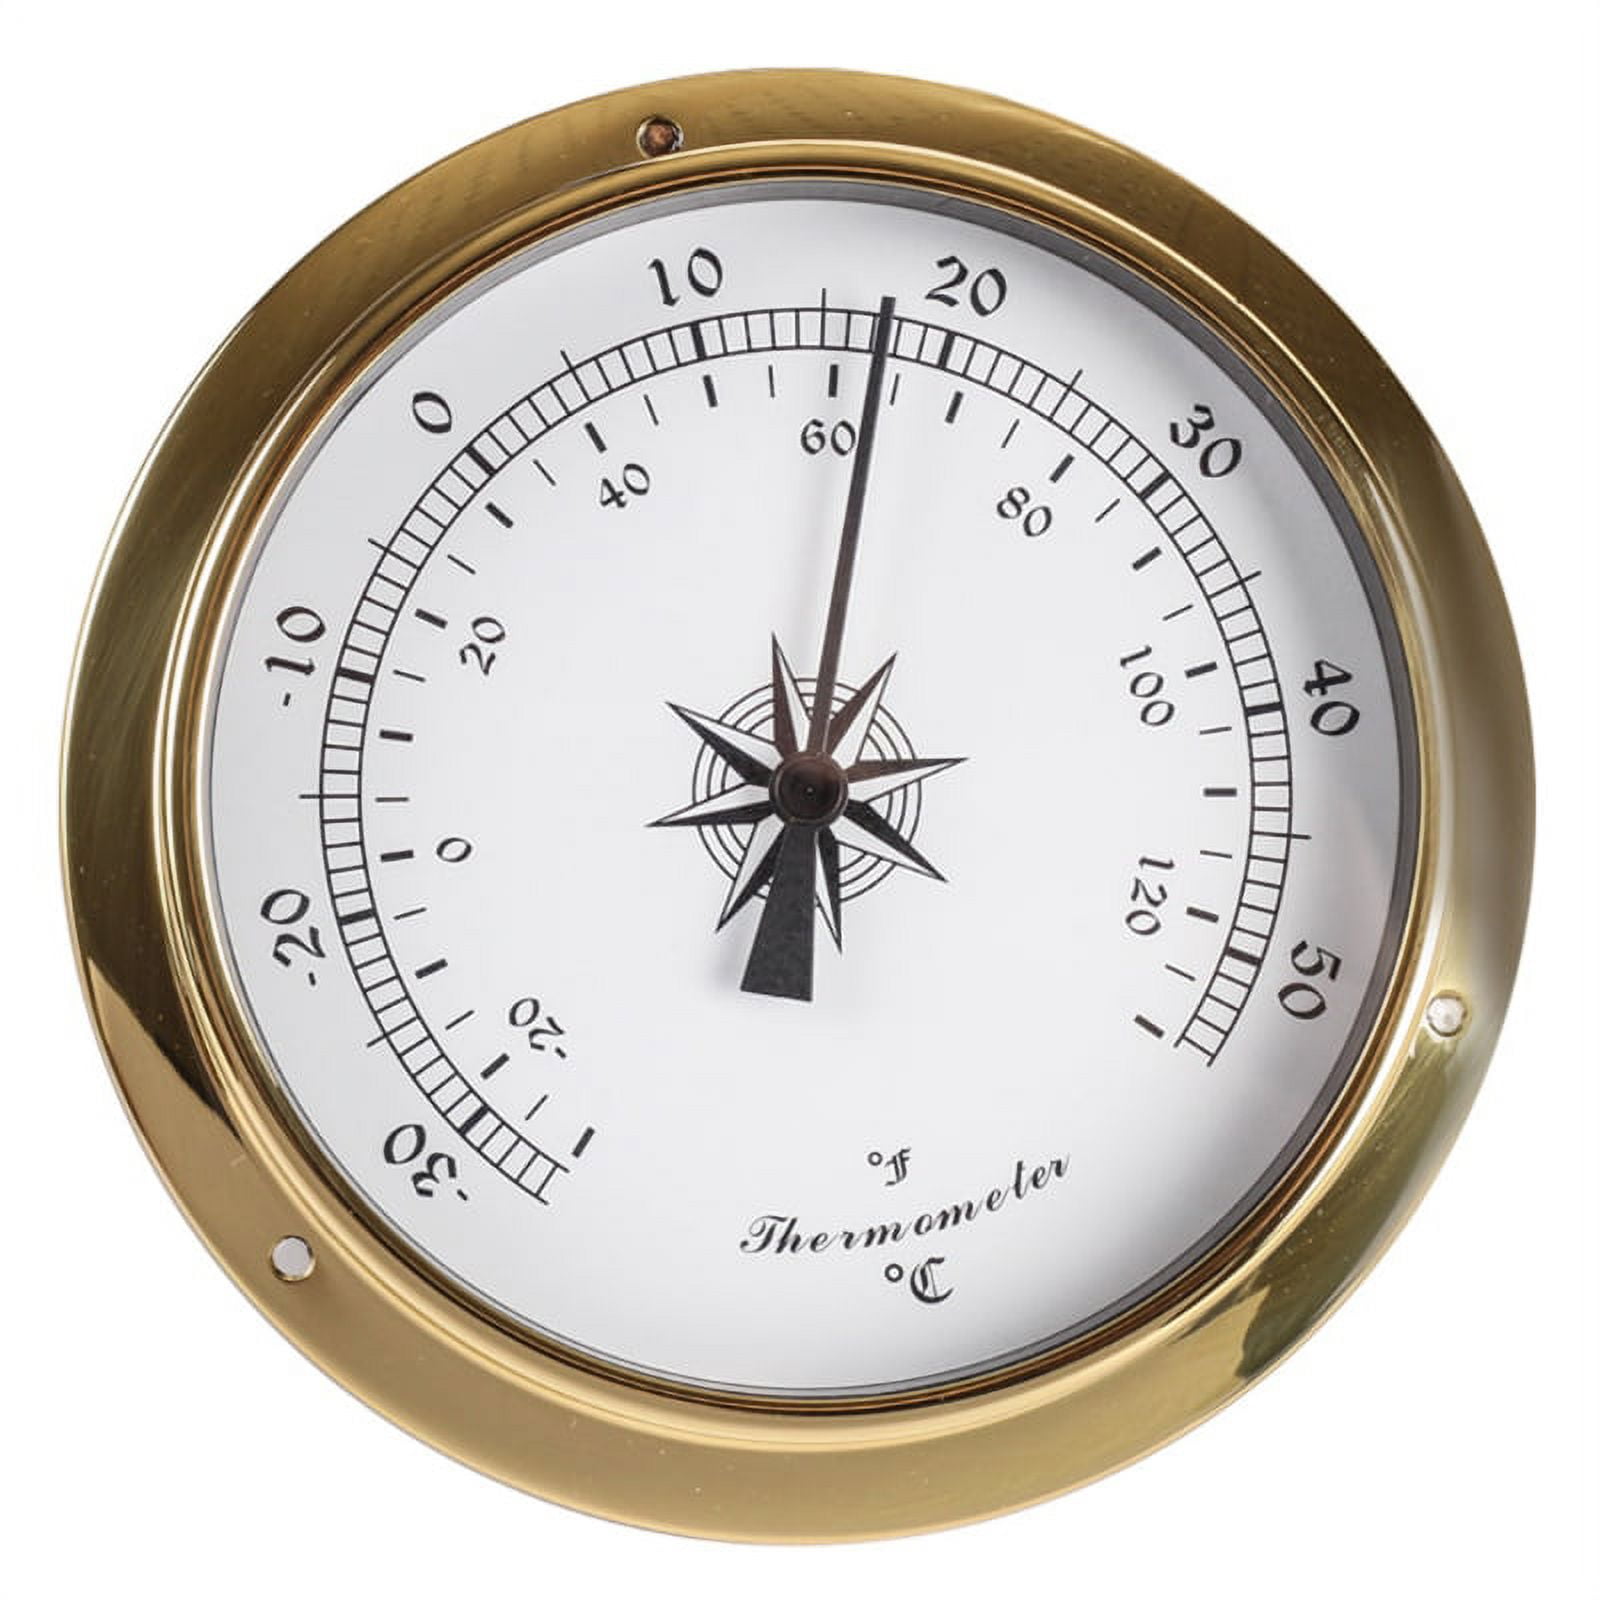 Outdoor Barometer Thermometer Hygrometer - 5in Barometer Weather Station,  Barometer for Home Wall, Fishing Boat, Baby Room, Office